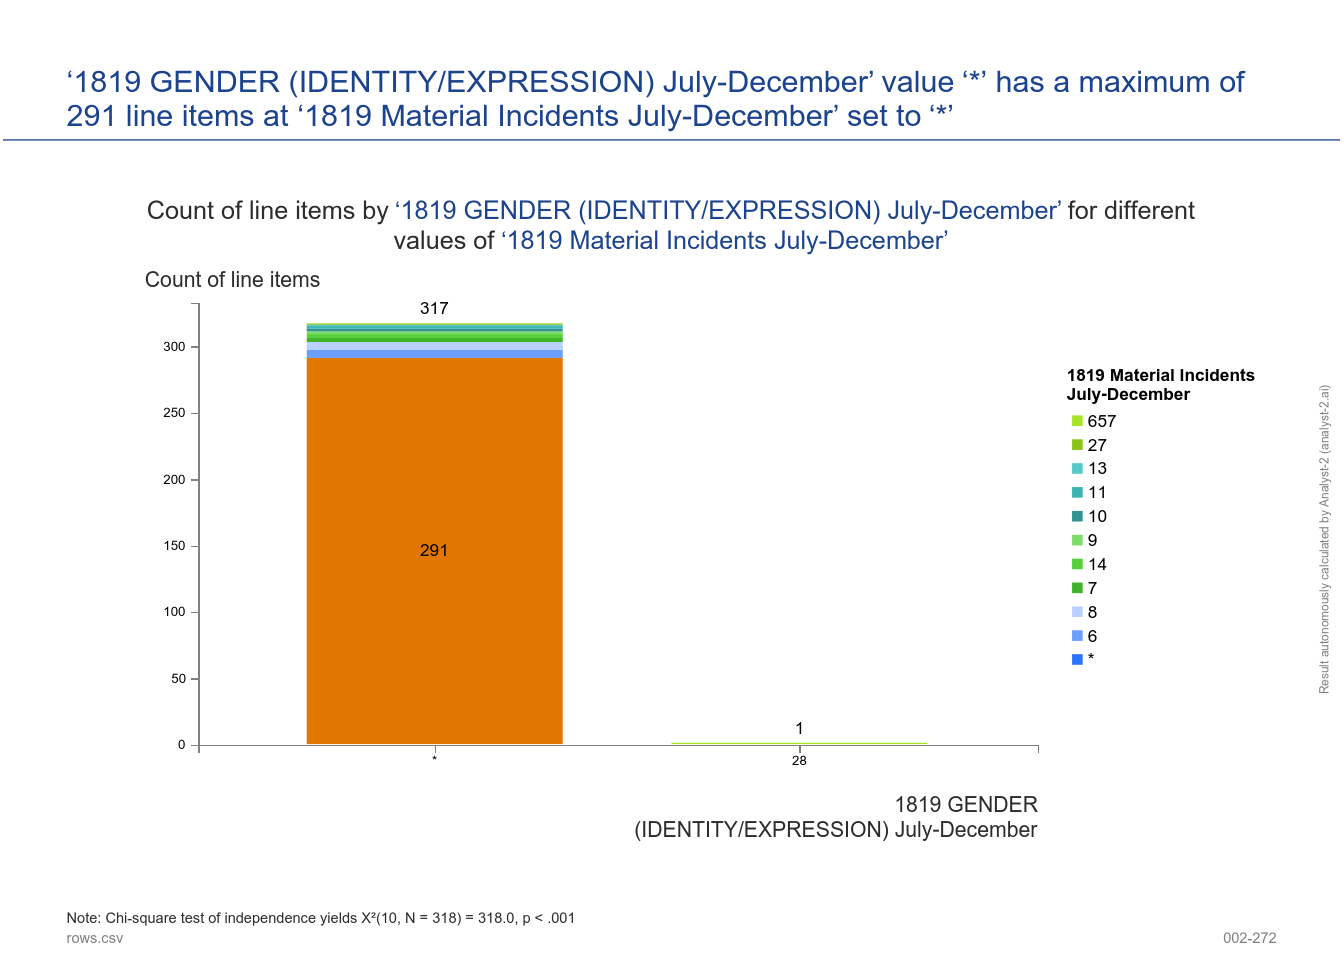 ‘1819 GENDER (IDENTITY/EXPRESSION) July-December’ value ‘*’ has a maximum of 291 line items at ‘1819 Material Incidents July-December’ set to ‘*’. (2018-2019 Bullying Harassment Discrimination Bi- Annual Report - 002-272)